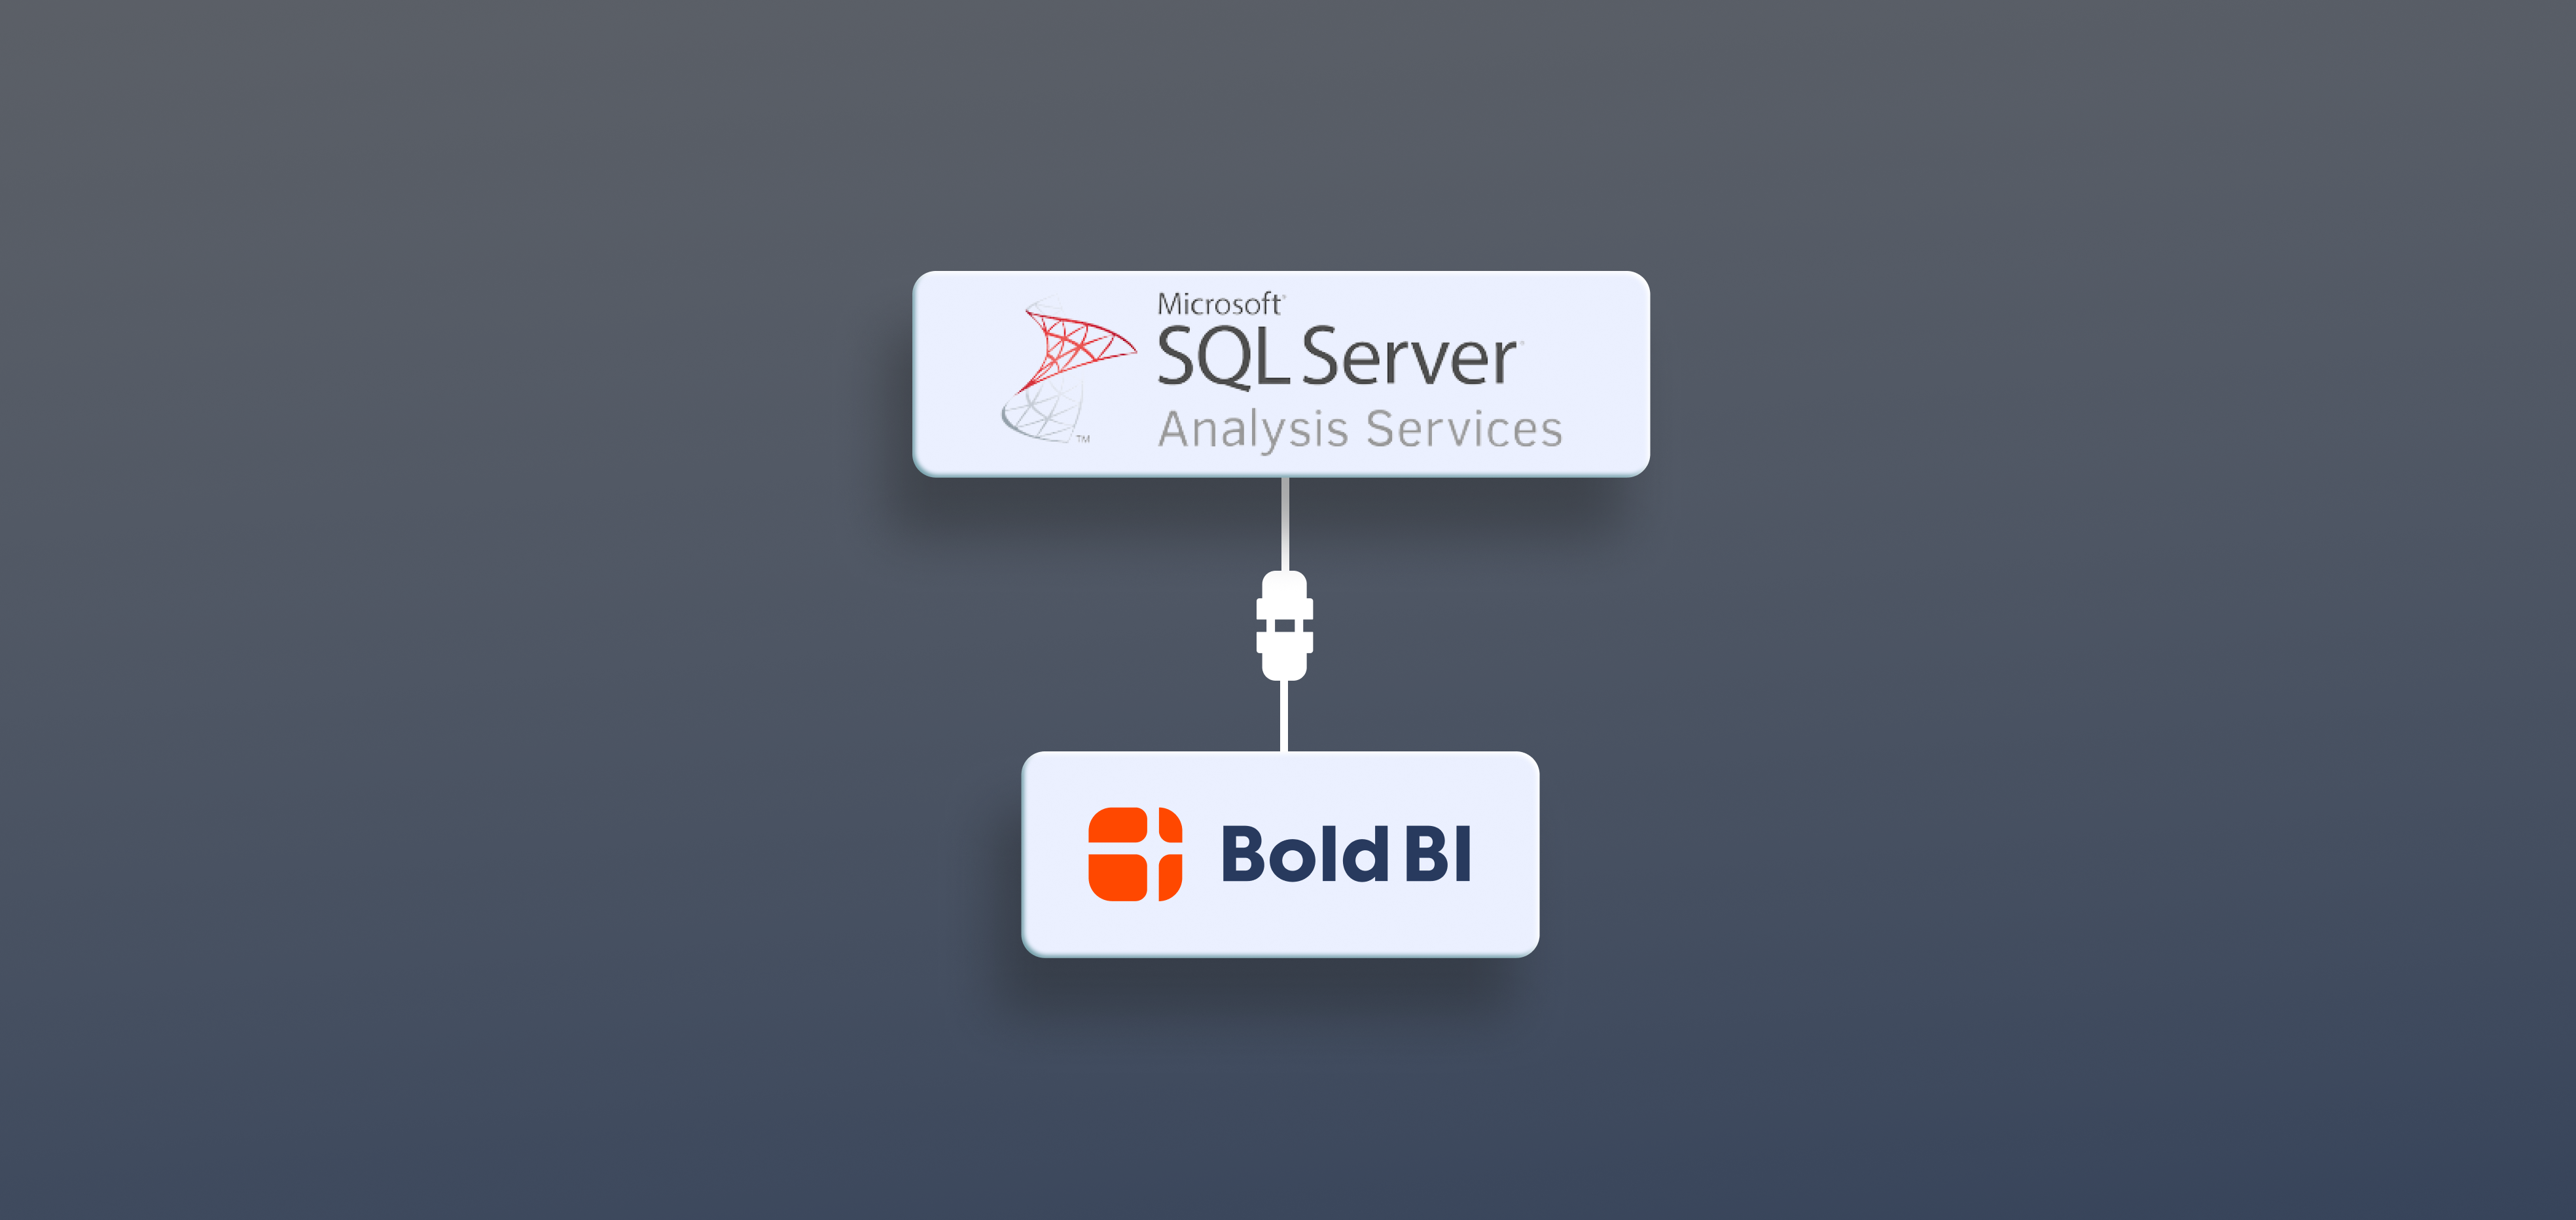 Connecting Bold BI to Microsoft SQL Server Analysis Services data source